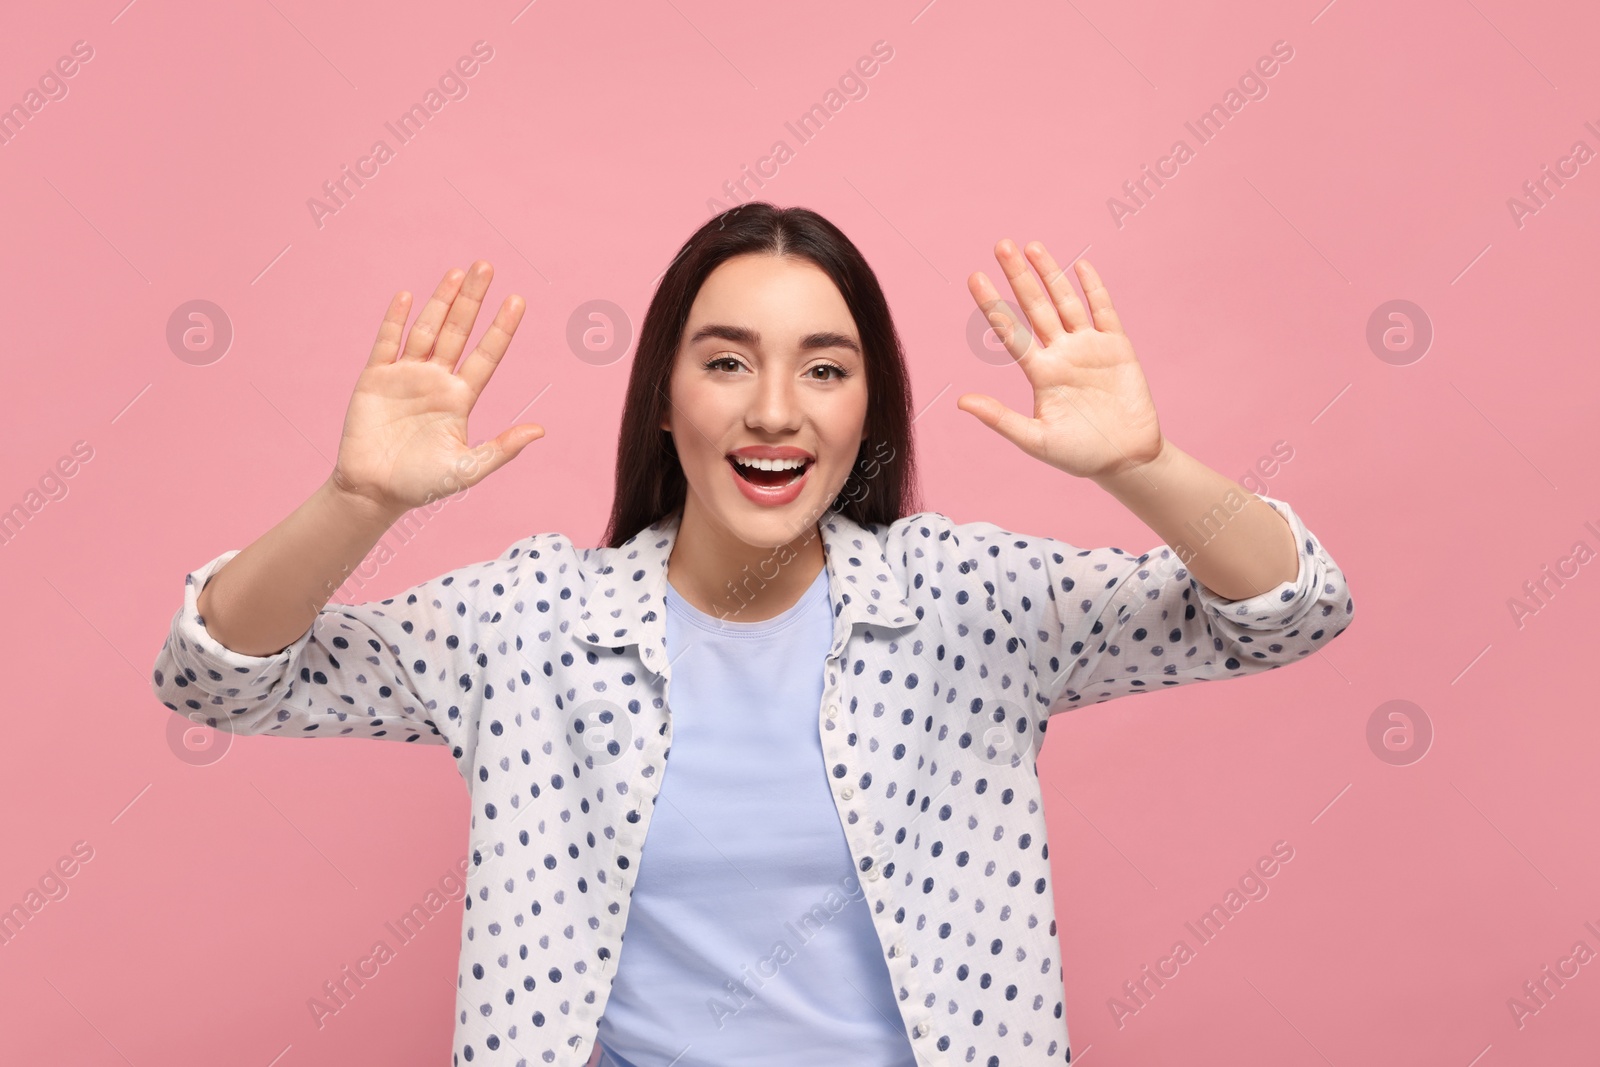 Photo of Happy woman giving high five with both hands on pink background